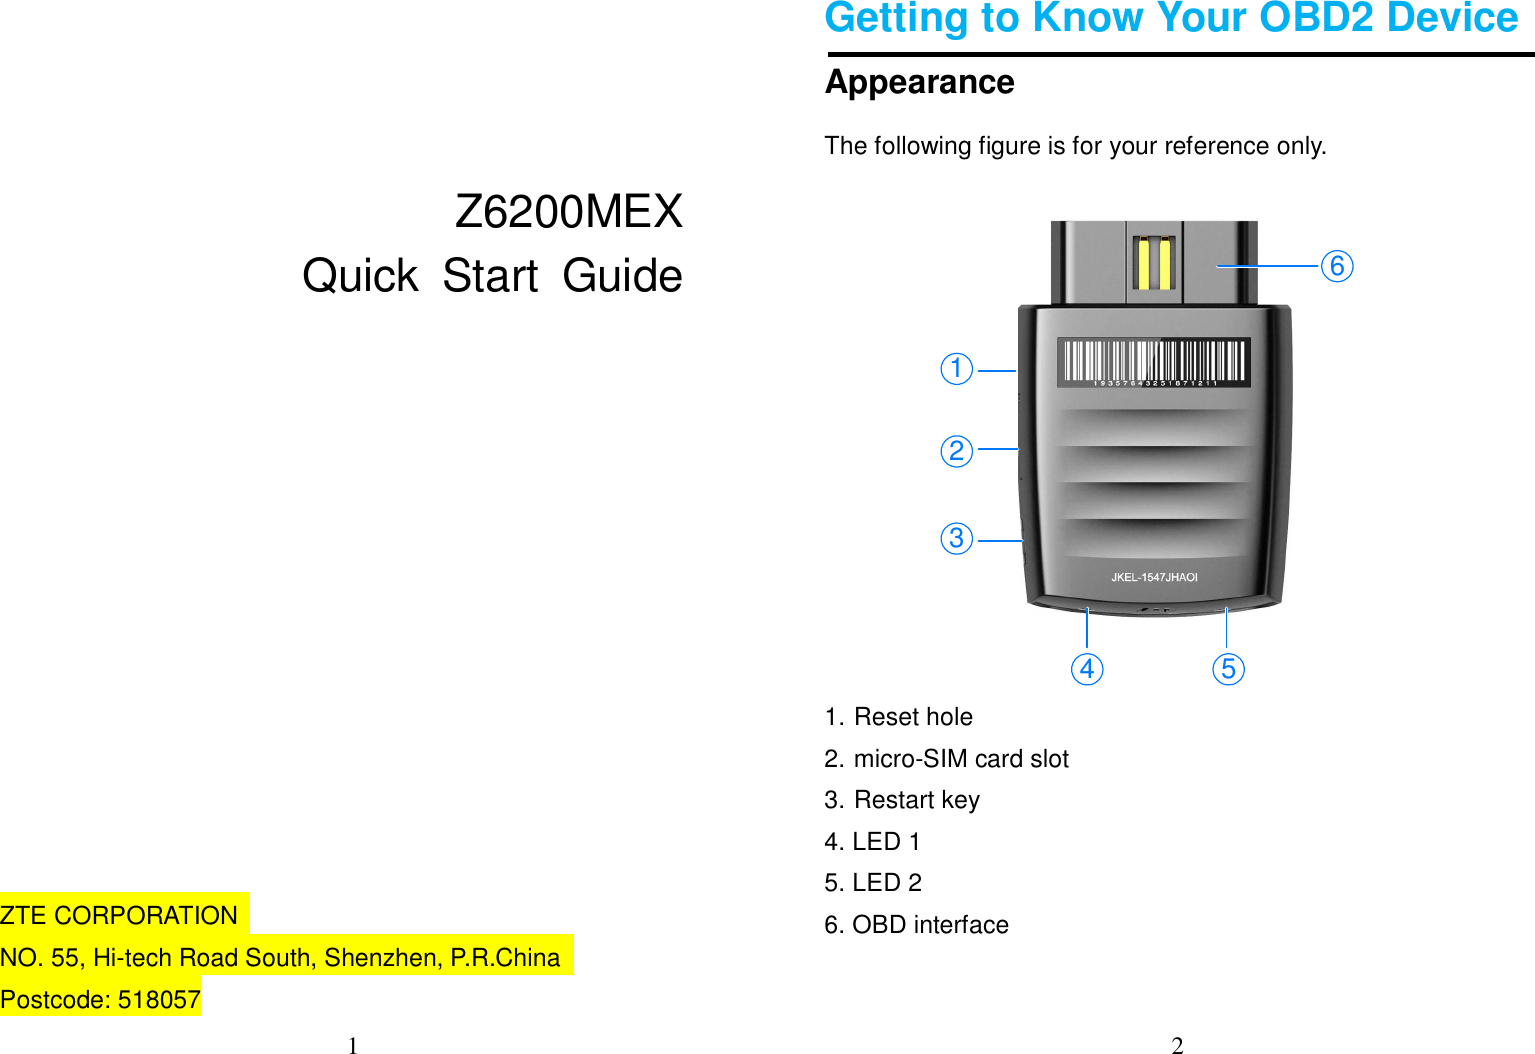 1     Z6200MEX       Quick  Start  Guide            ZTE CORPORATION   NO. 55, Hi-tech Road South, Shenzhen, P.R.China   Postcode: 518057 2  Getting to Know Your OBD2 Device Appearance The following figure is for your reference only.     1. Reset hole   2. micro-SIM card slot 3. Restart key   4. LED 1 5. LED 2 6. OBD interface  1234 56